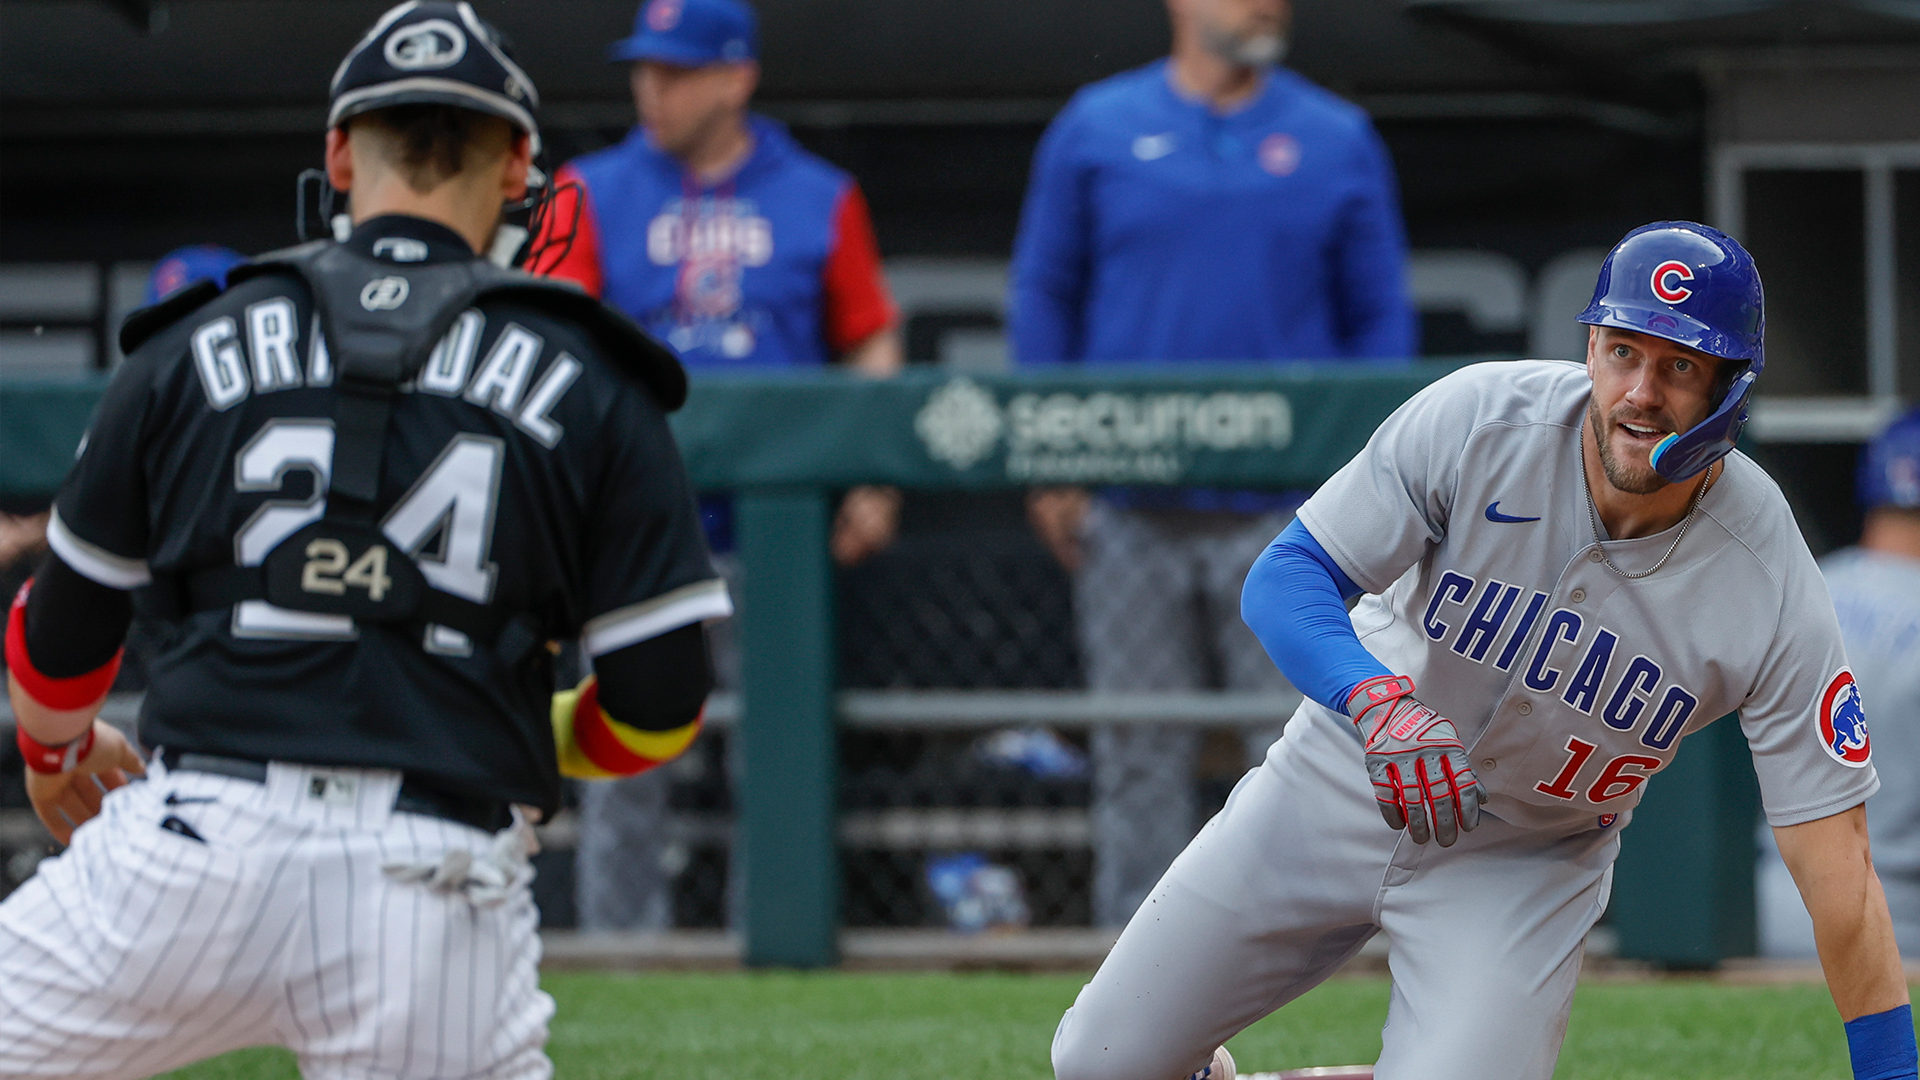 City Series arrives with Cubs, White Sox at a crossroads